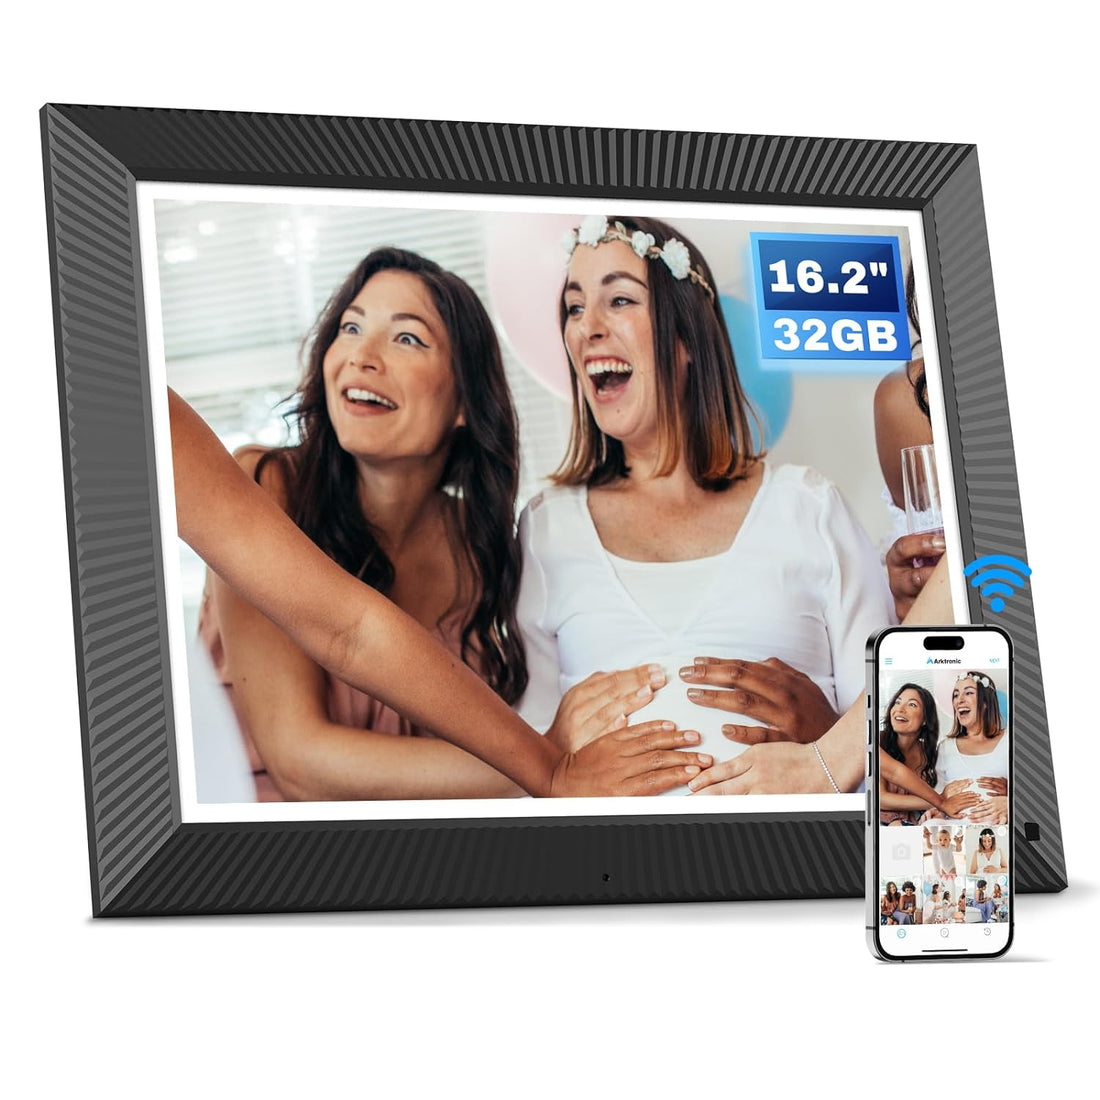 Arktronic 16.2 Inch Extra Large Digital Picture Frame 32GB, WiFi Electronic Photo Frame 1258 * 930 IPS HD Touch Screen, Motion Sensor, Send Photos via App/Email from Anywhere, Gift for Grandparents